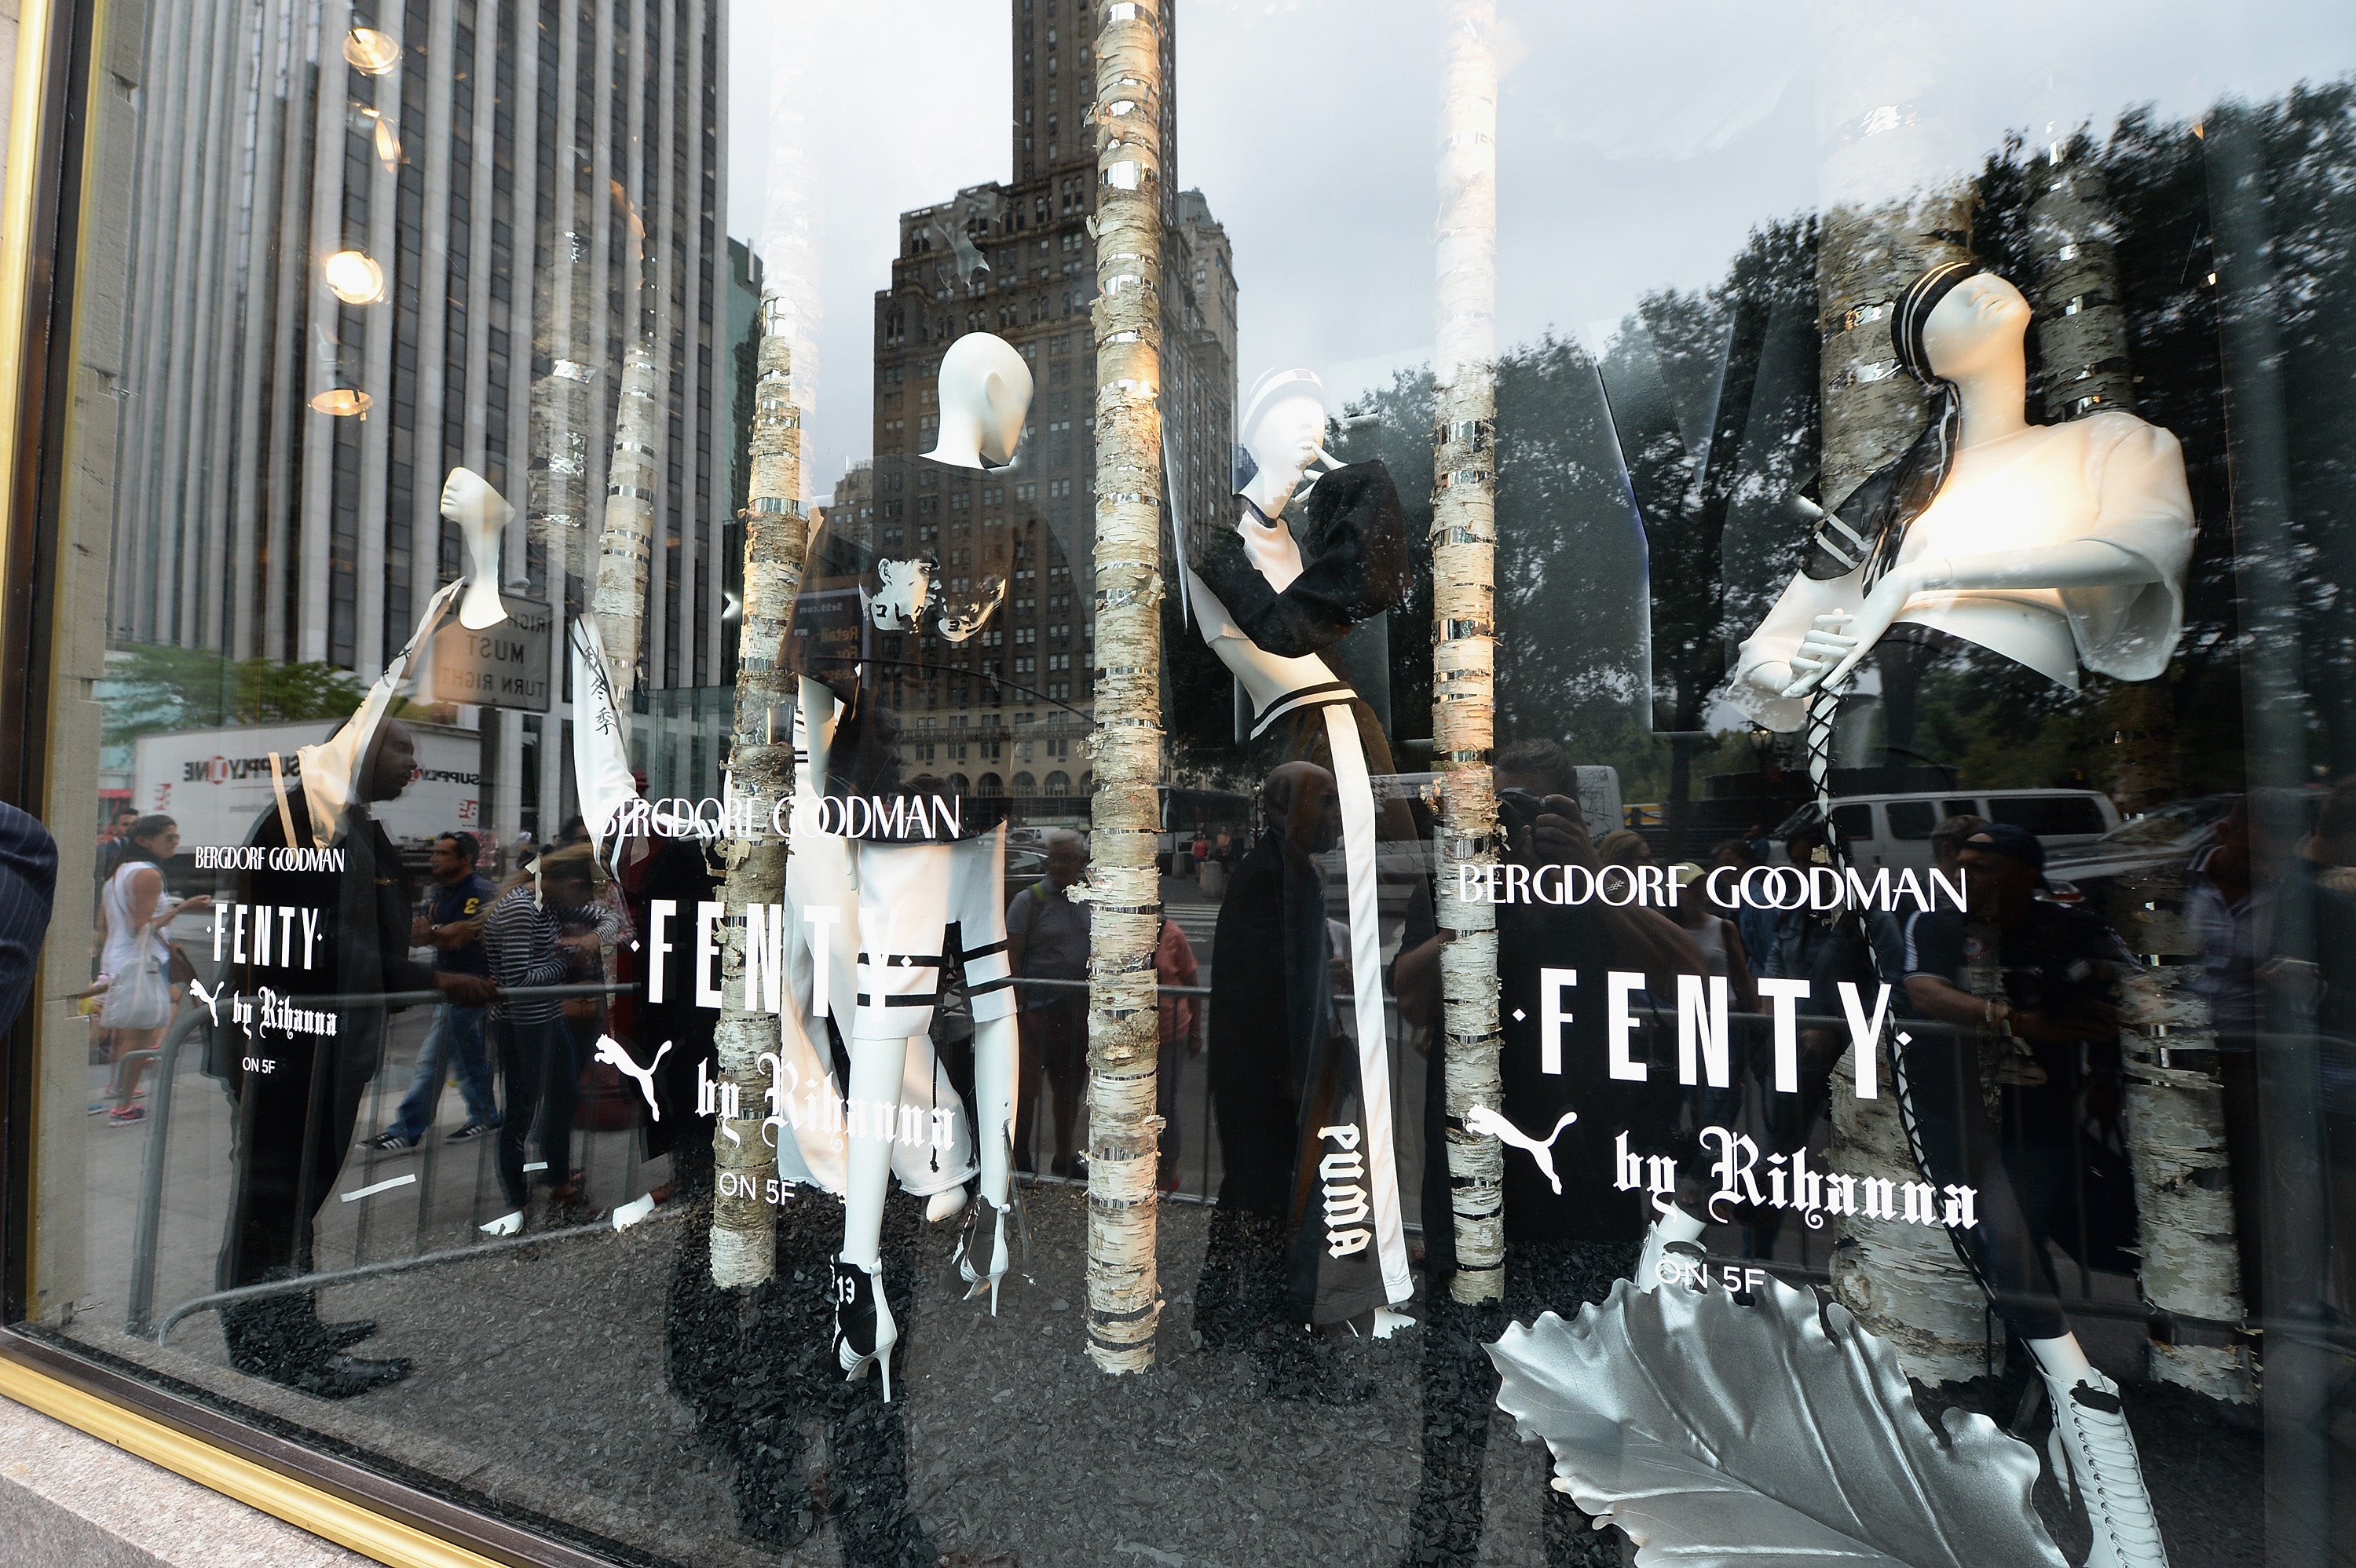 Get a BTS Look at Rihanna's Fenty x PUMA Collection Launch
